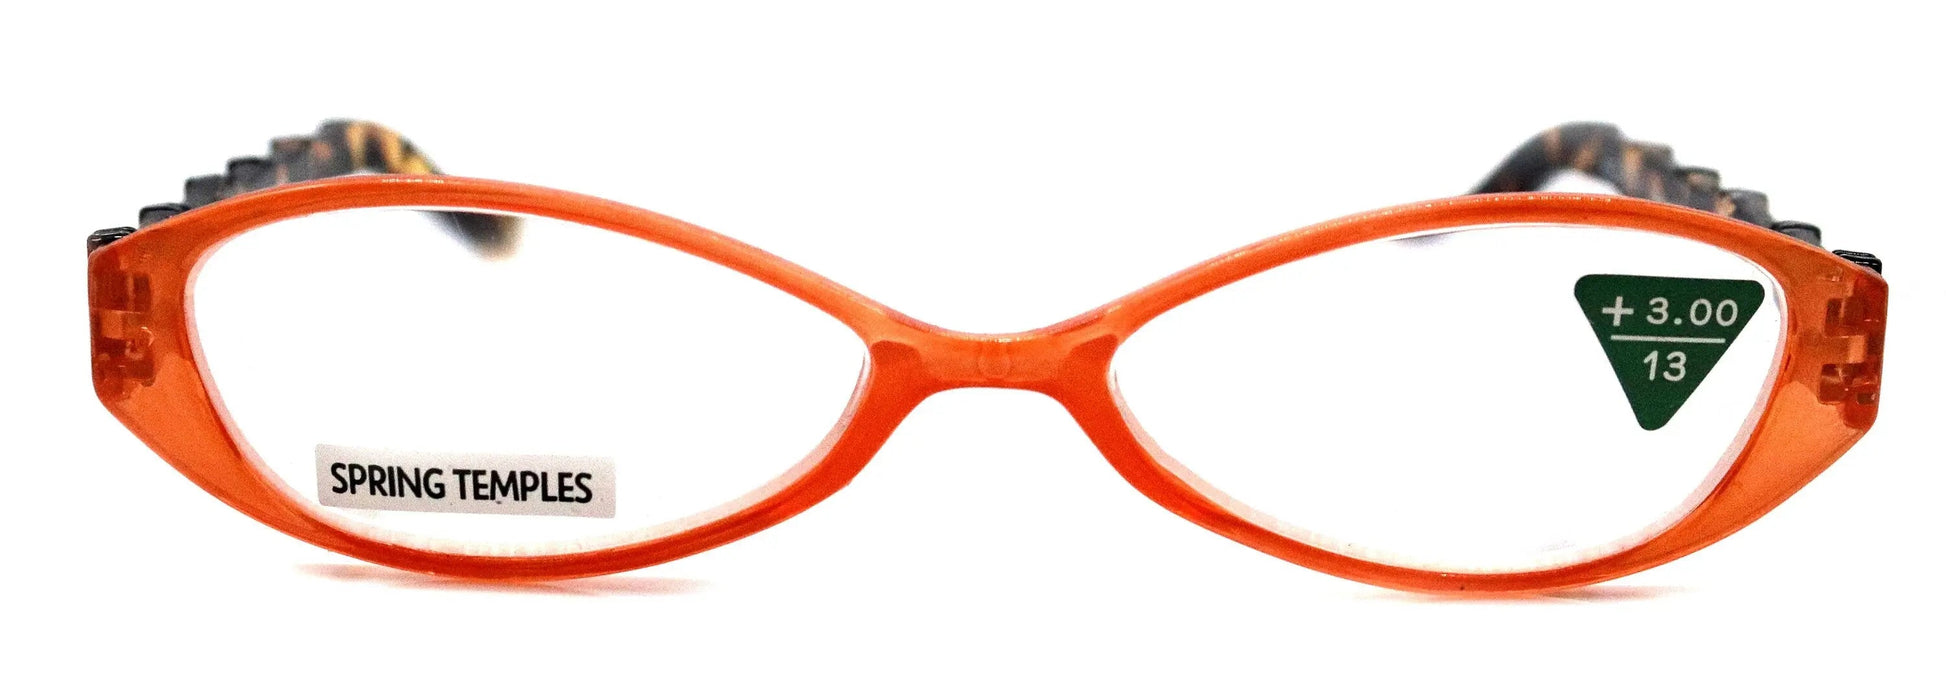 Lucky, (Premium) Reading Glasses, High End Readers +1.25 +1.50 +1.75 .. +3 Cat Eye. Bamboo Temple. (Orange) Optical Frames NY Fifth Avenue.